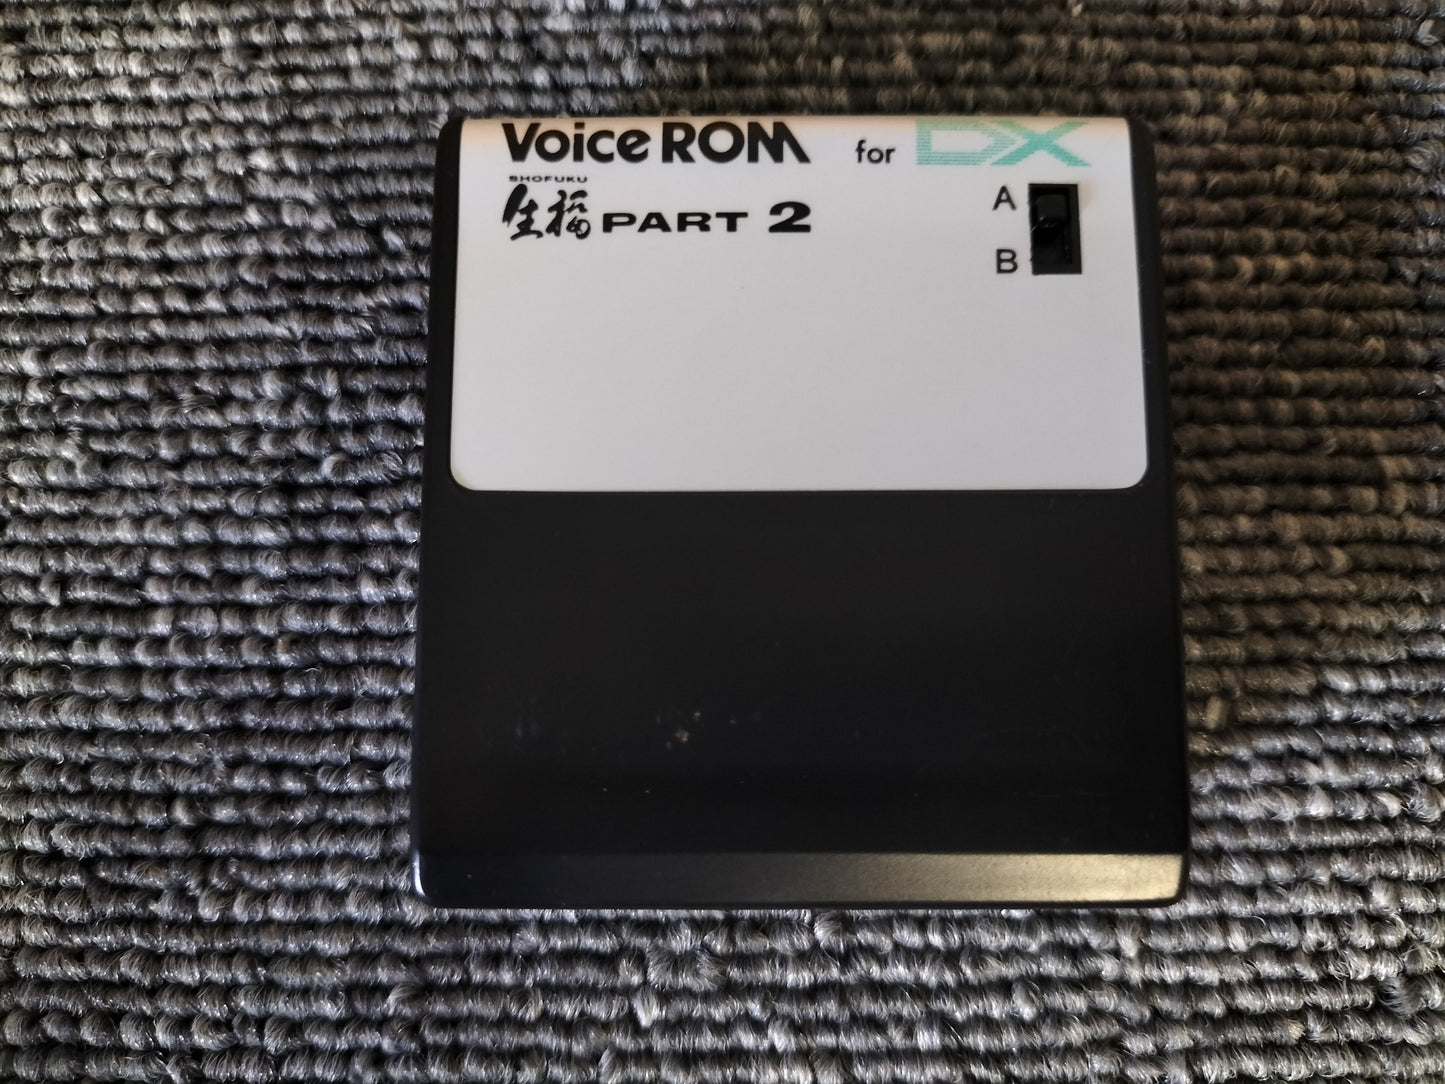 DX7カートリッジ　生福　SHOFUKU　PART2 　VoiceROM for DX7　DX7用音源　ケース付き　O22071406